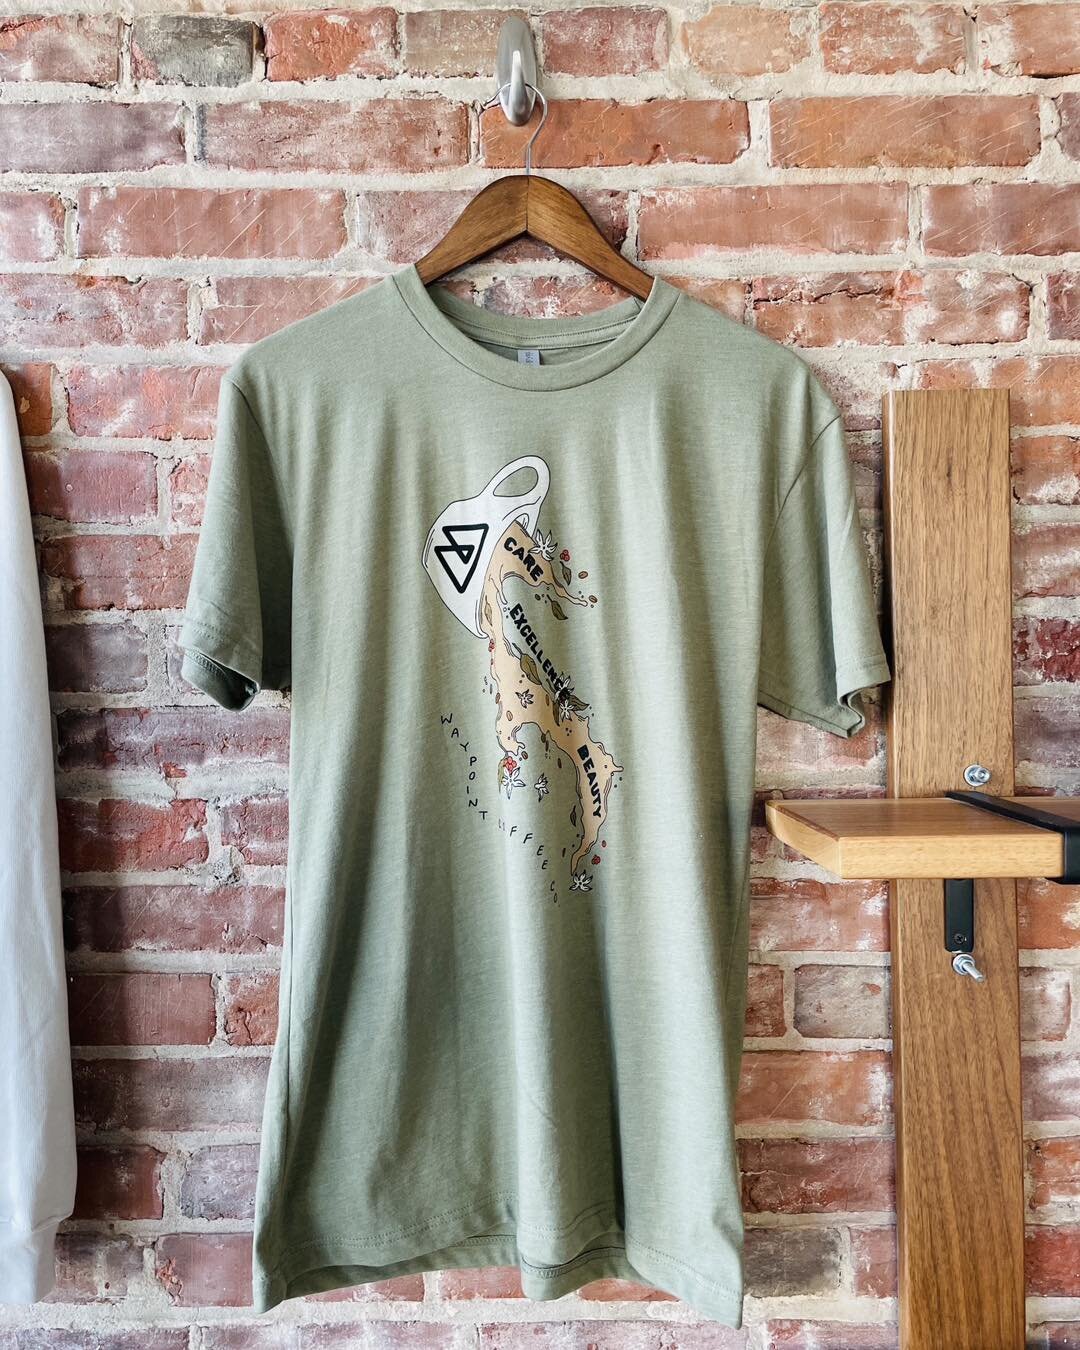 Show off Waypoint with these stylish, breathable Olive Green T-Shirts. 👌🏻
#waypointcoffeeco